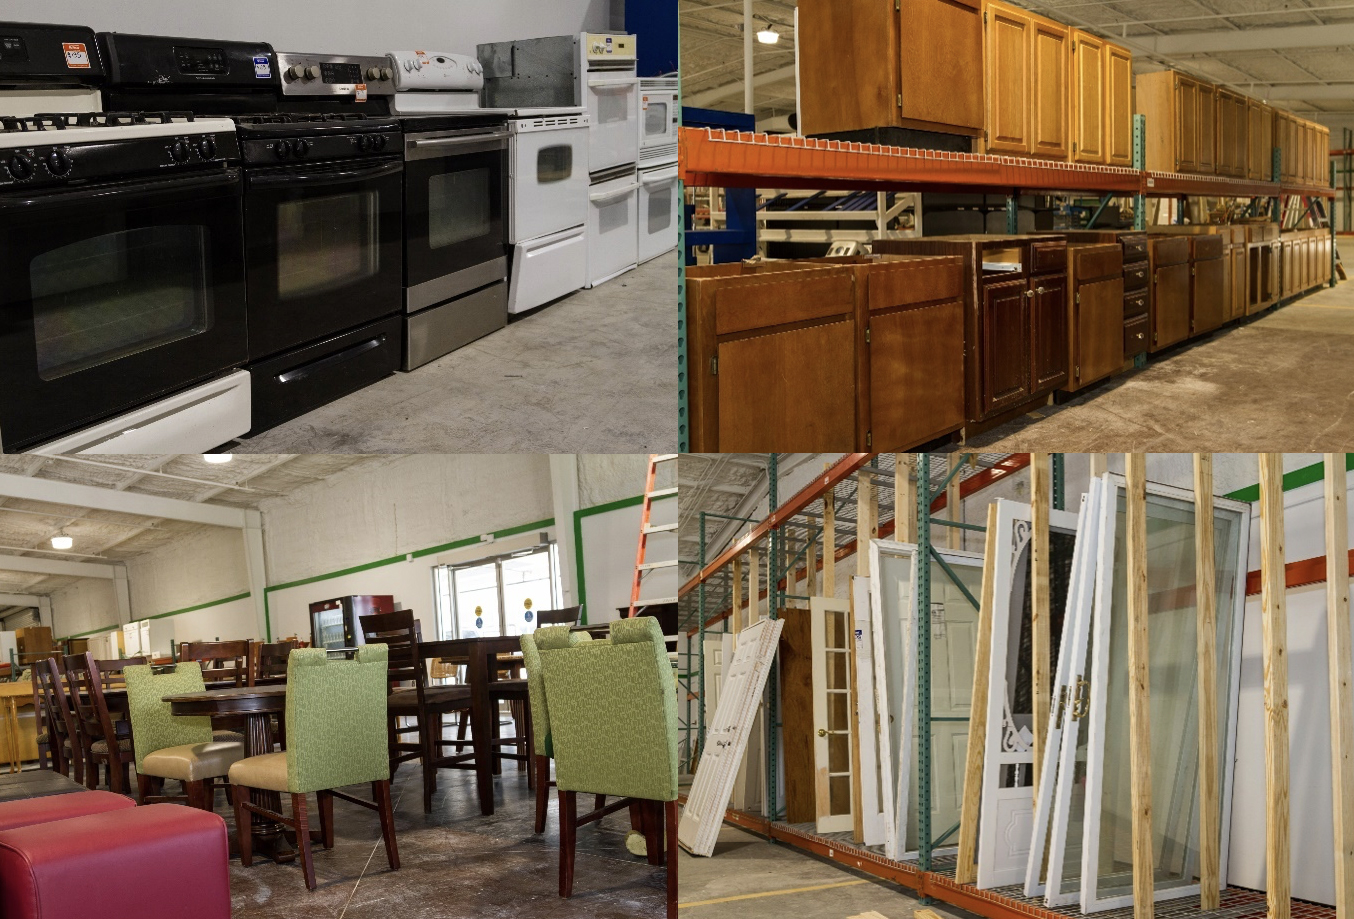 collage of restore photos including stoves, cabinets, chairs and tables, and doors